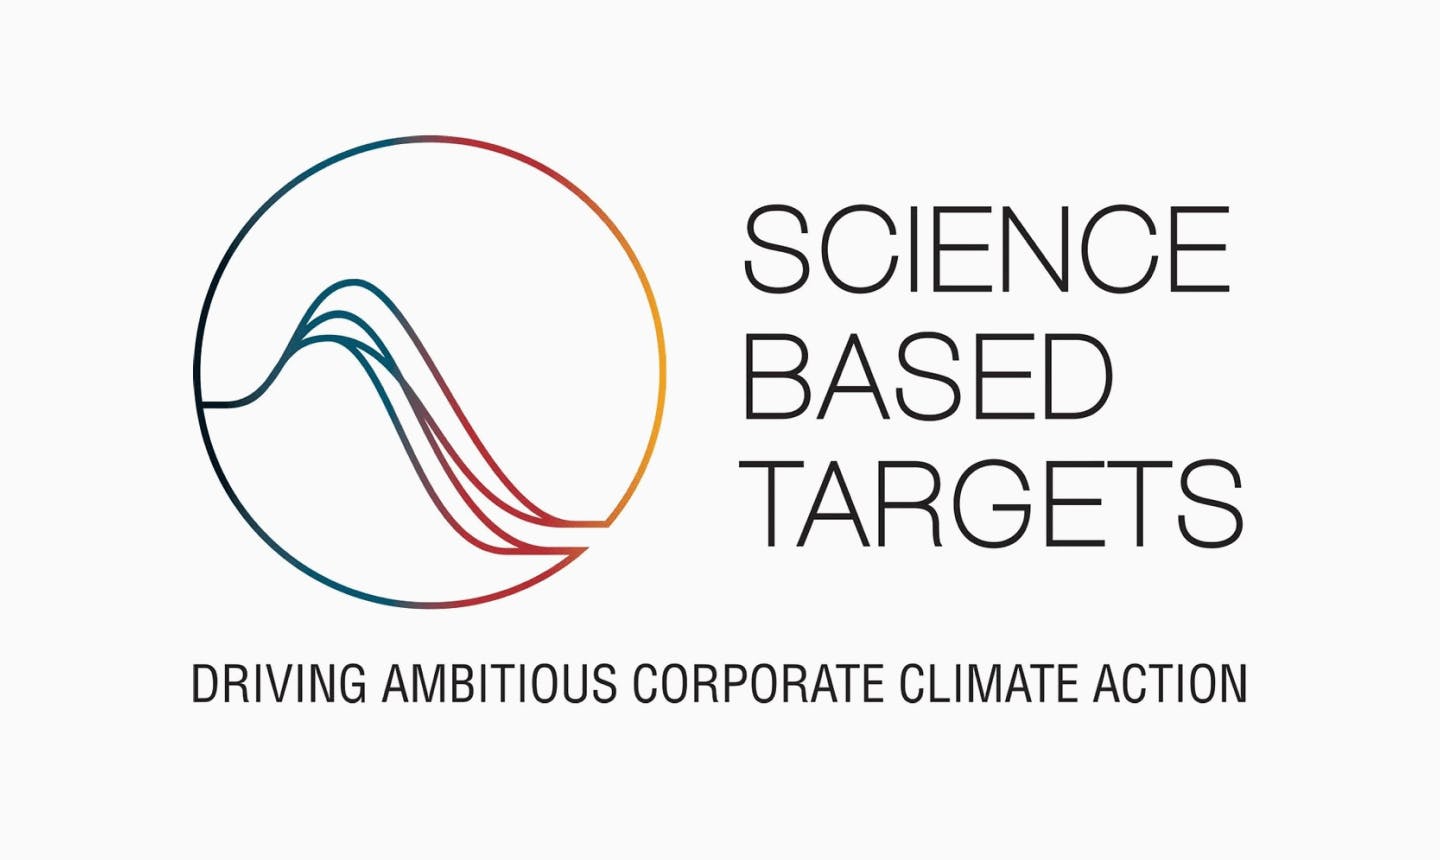 Science based targets – driving ambitious corporate climate action